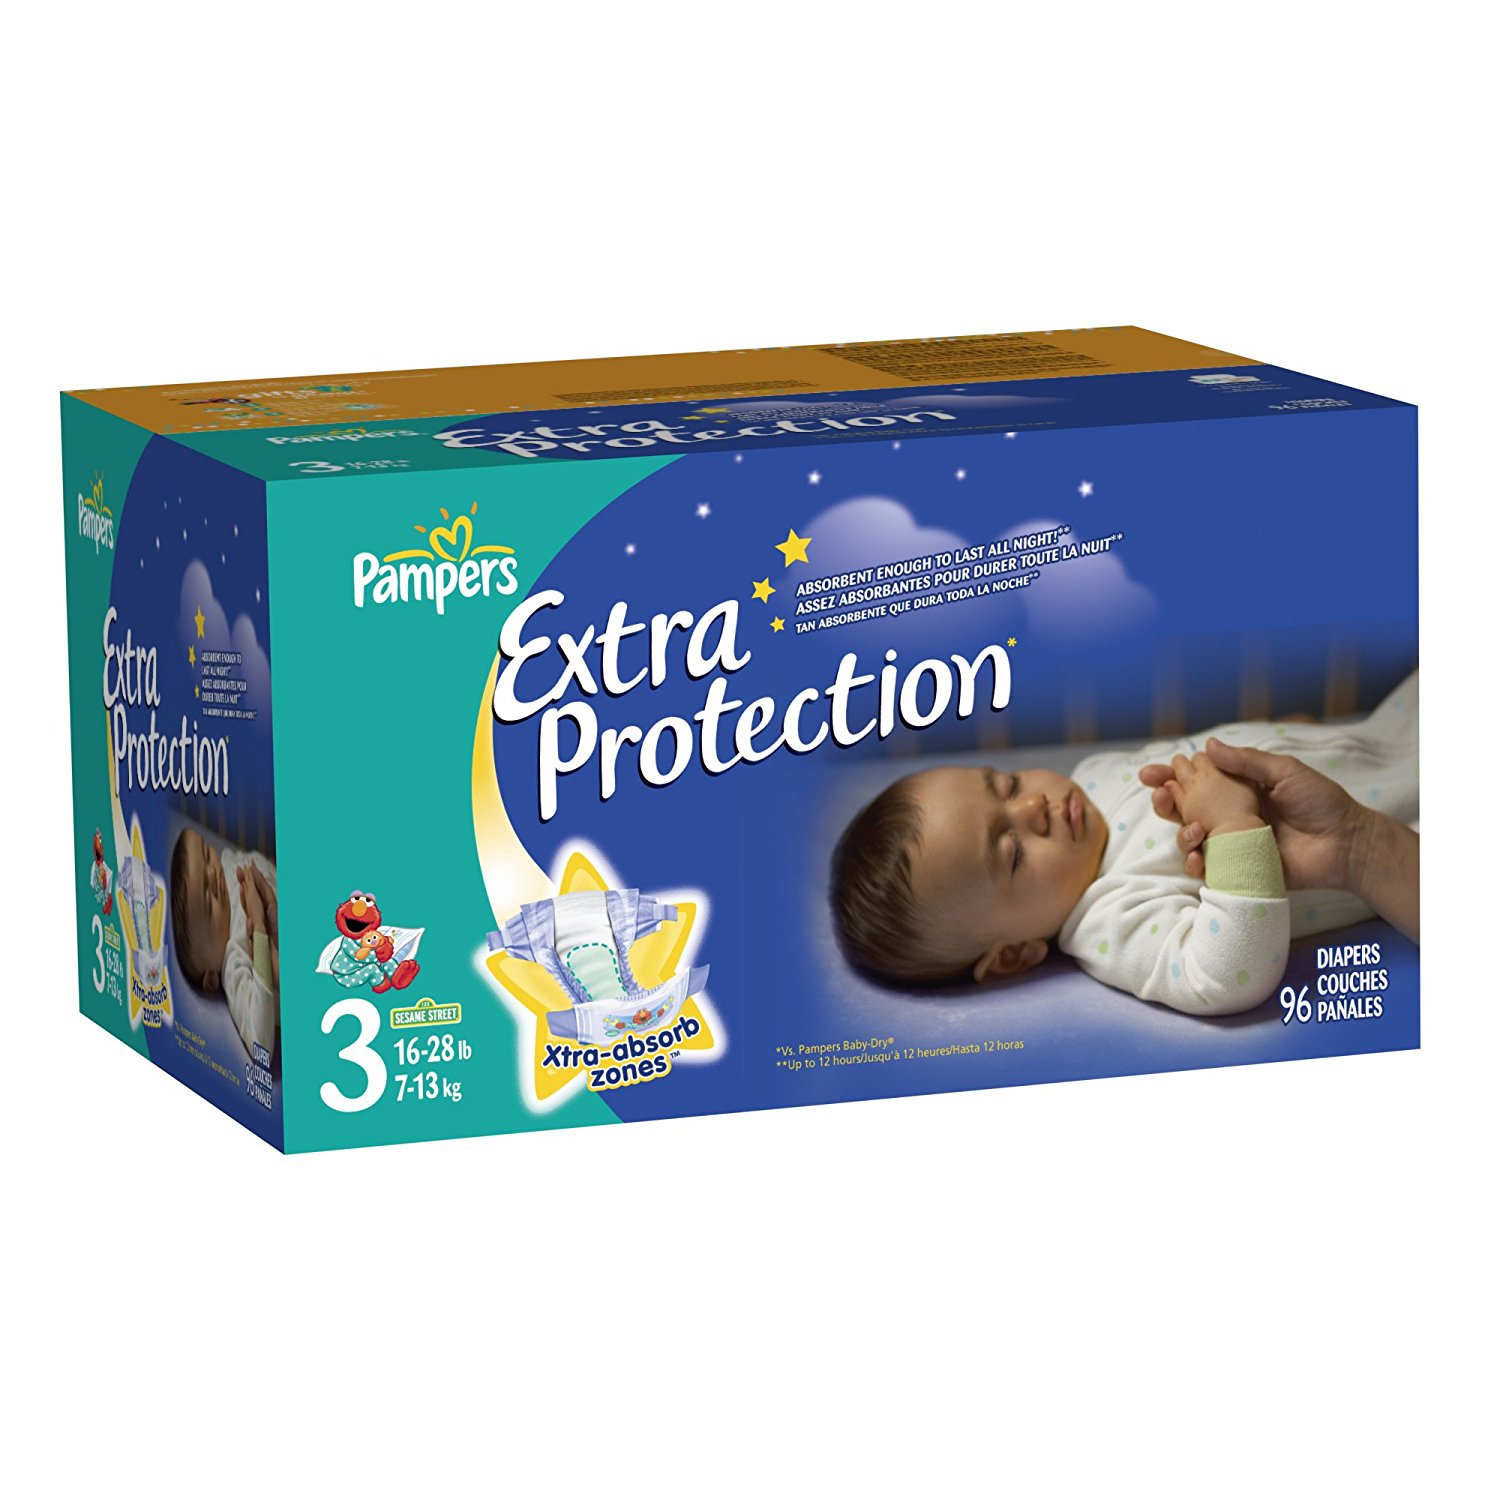 Amazon.com: Pampers Extra Protection Nighttime Diapers Super Pack 